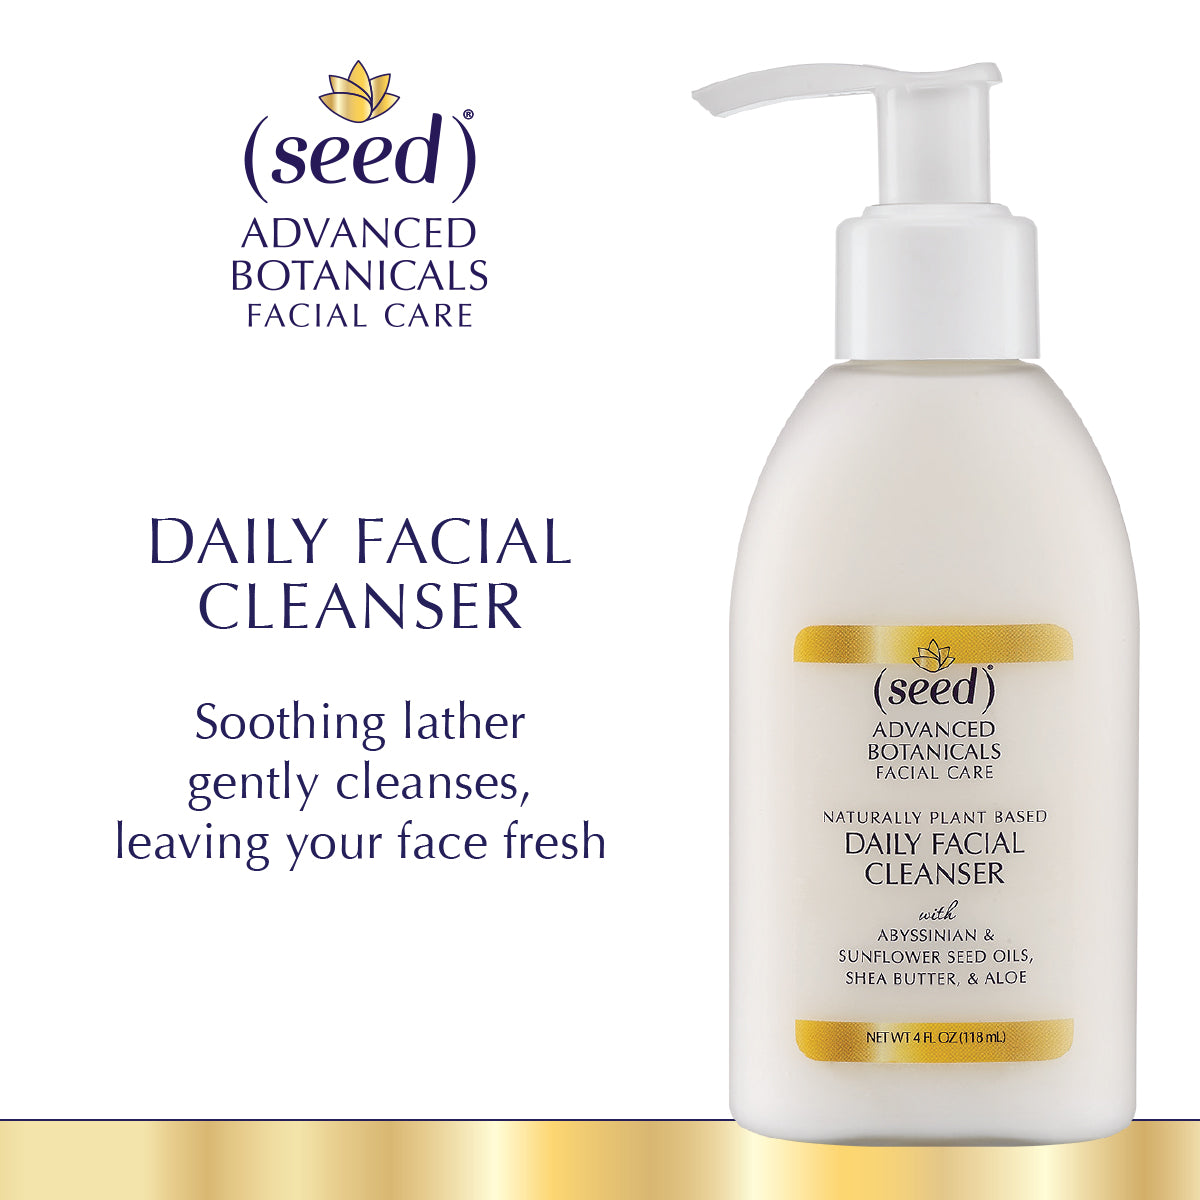 Seed Advanced Botanicals Face Wash Cleanser Benefits